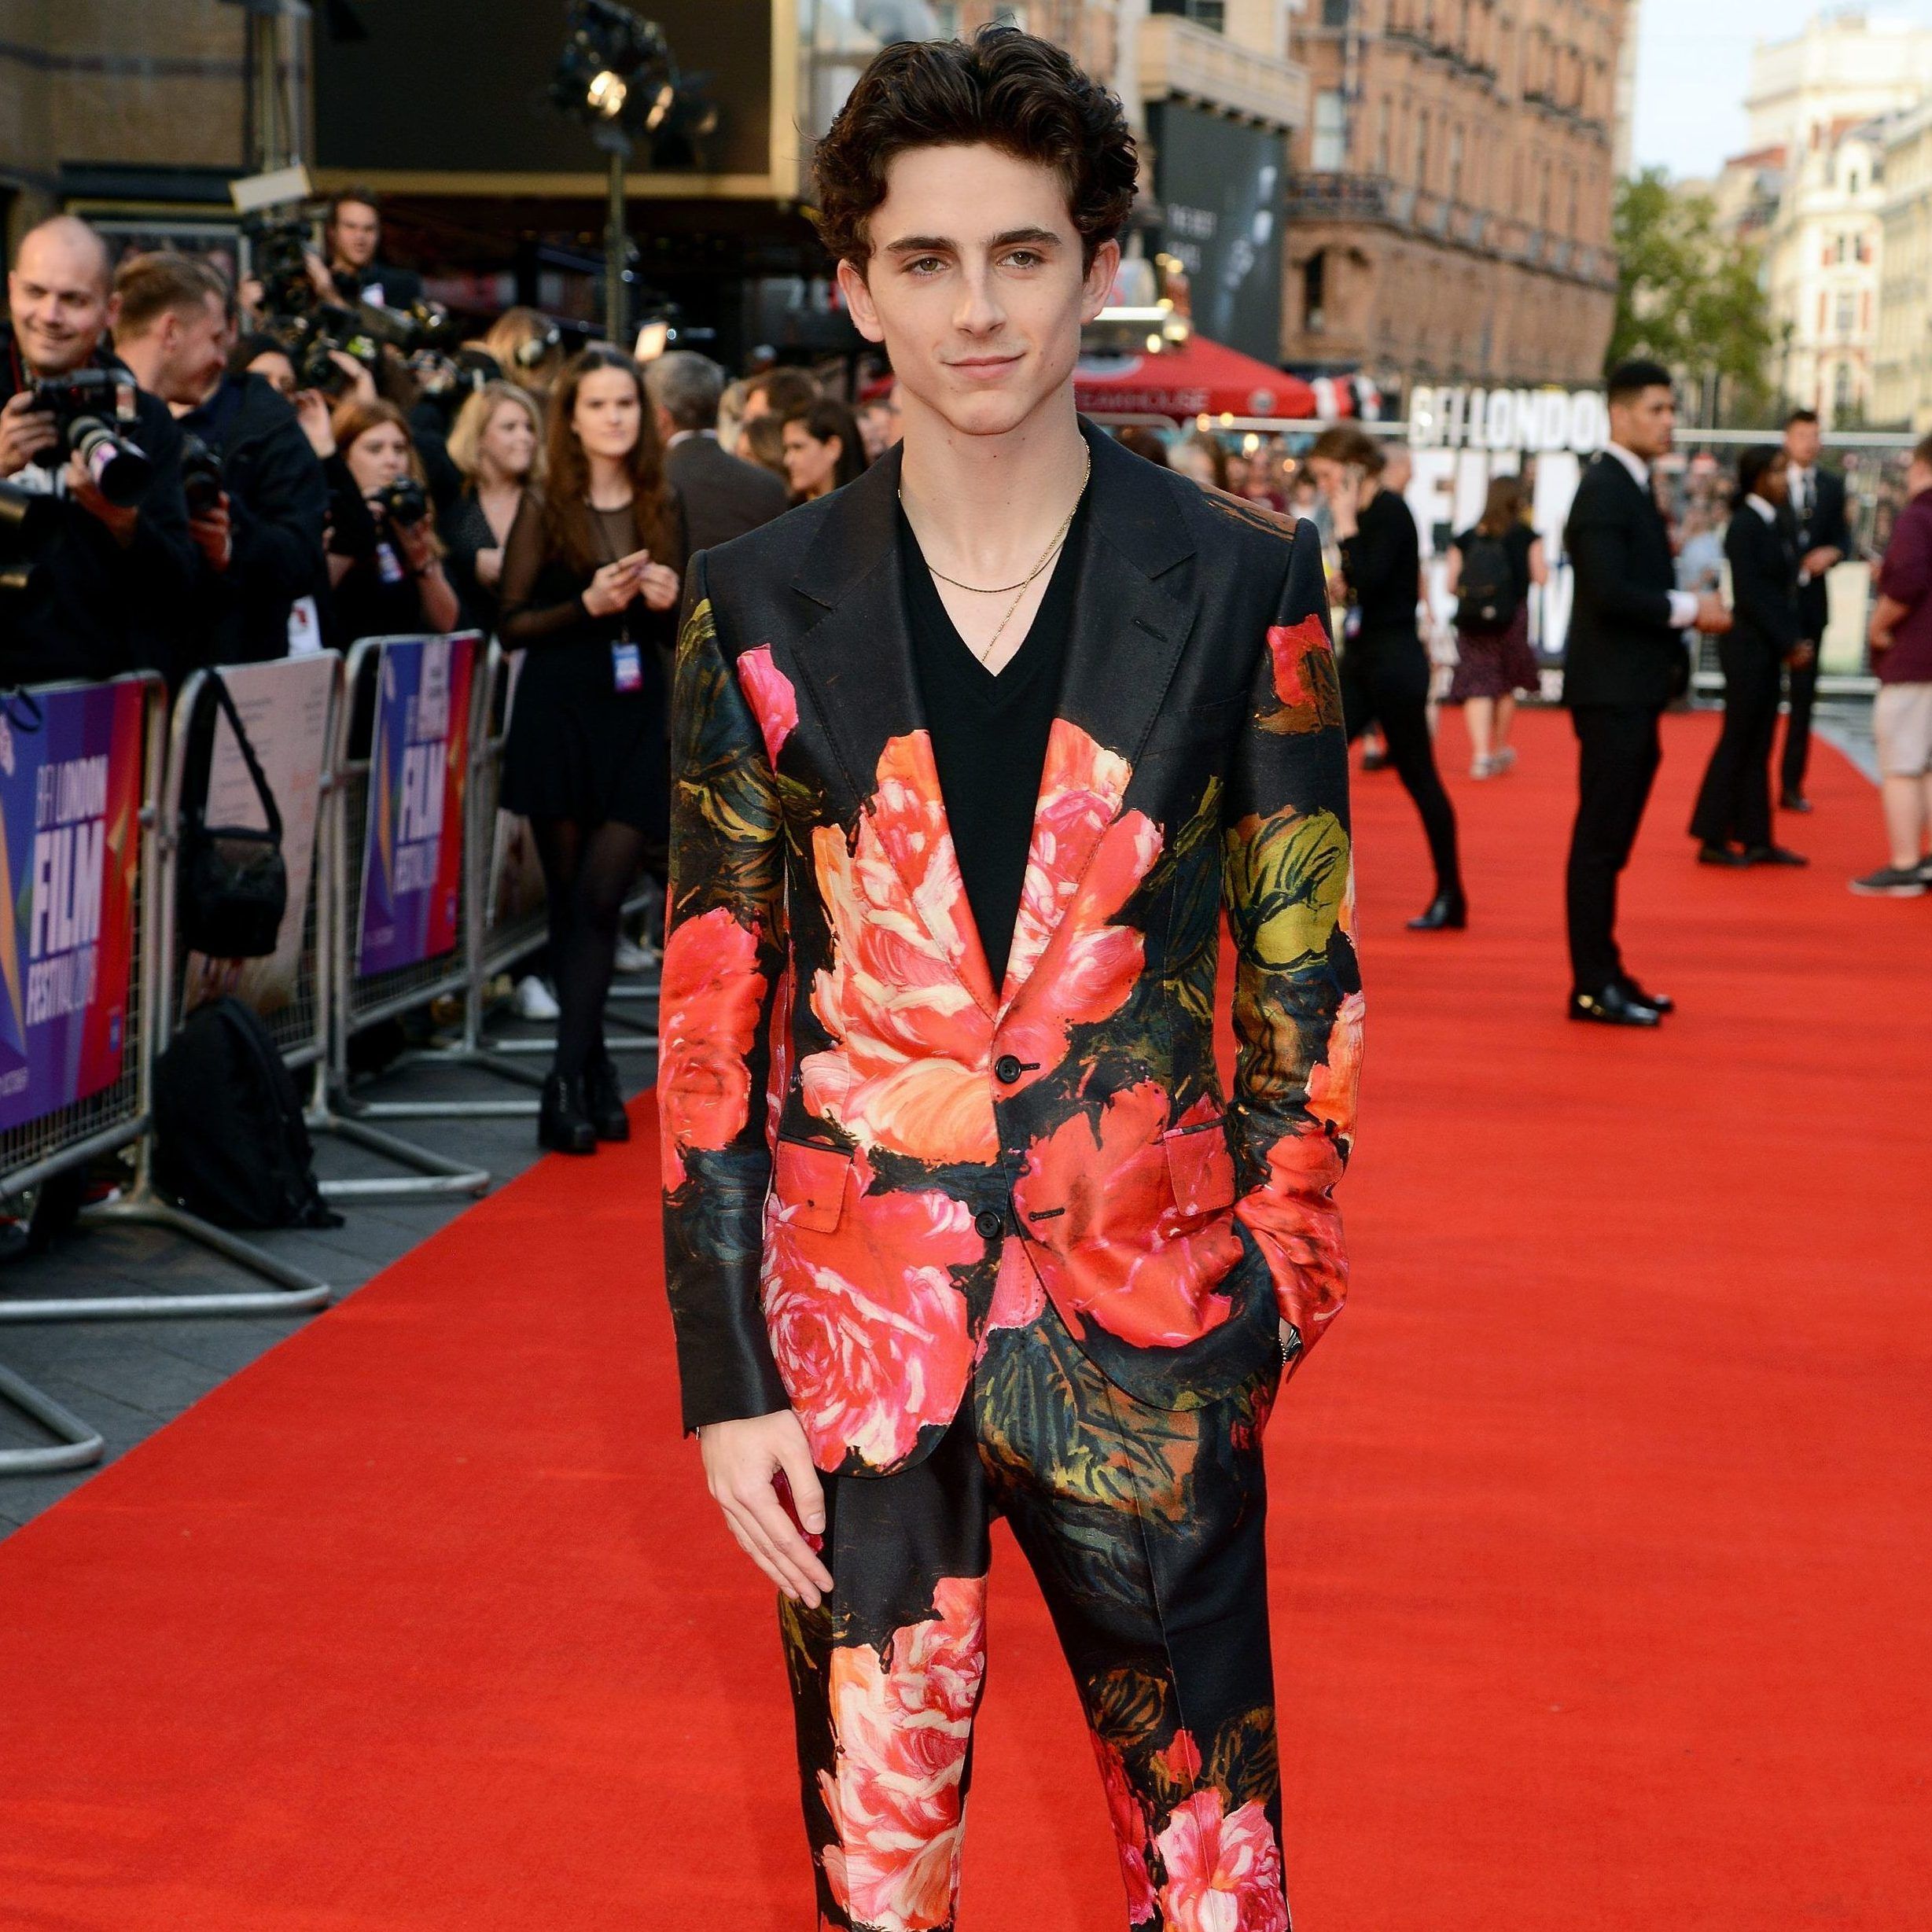 Why we think Timothée Chalamet's style proves he's a fashion veteran